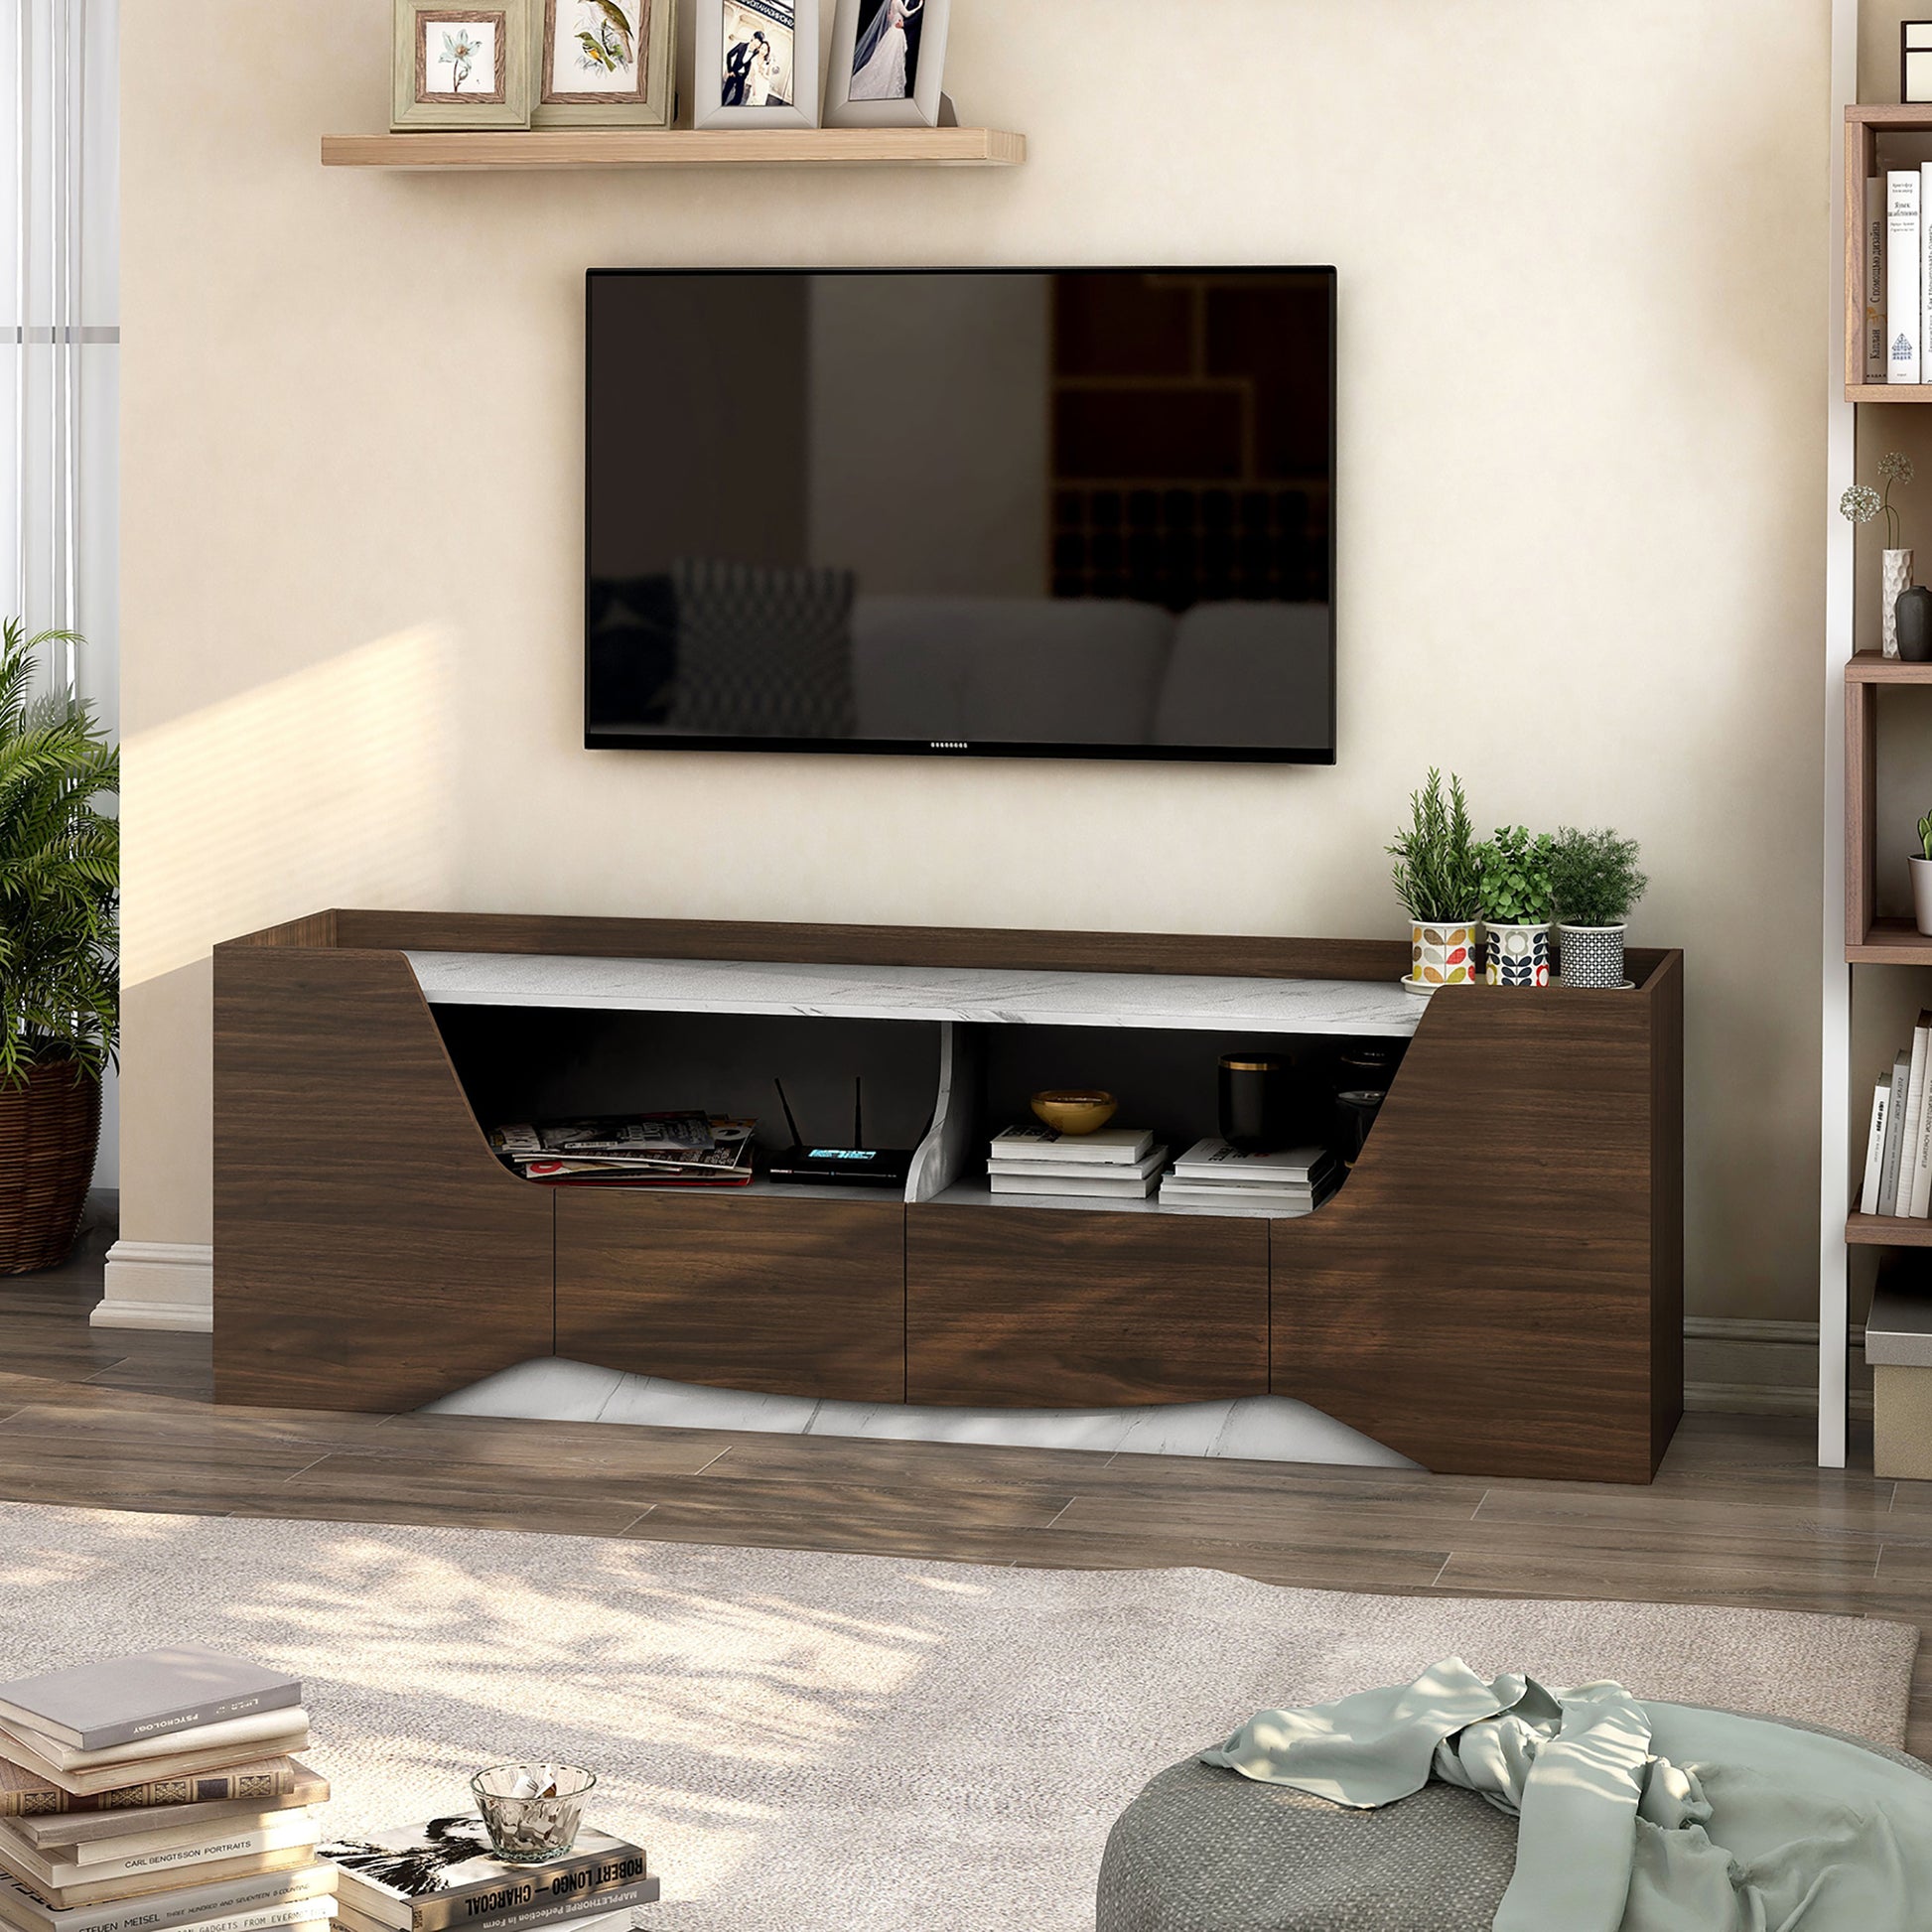 Left angled transitional wenge and faux marble two-drawer TV stand in a living room with accessories